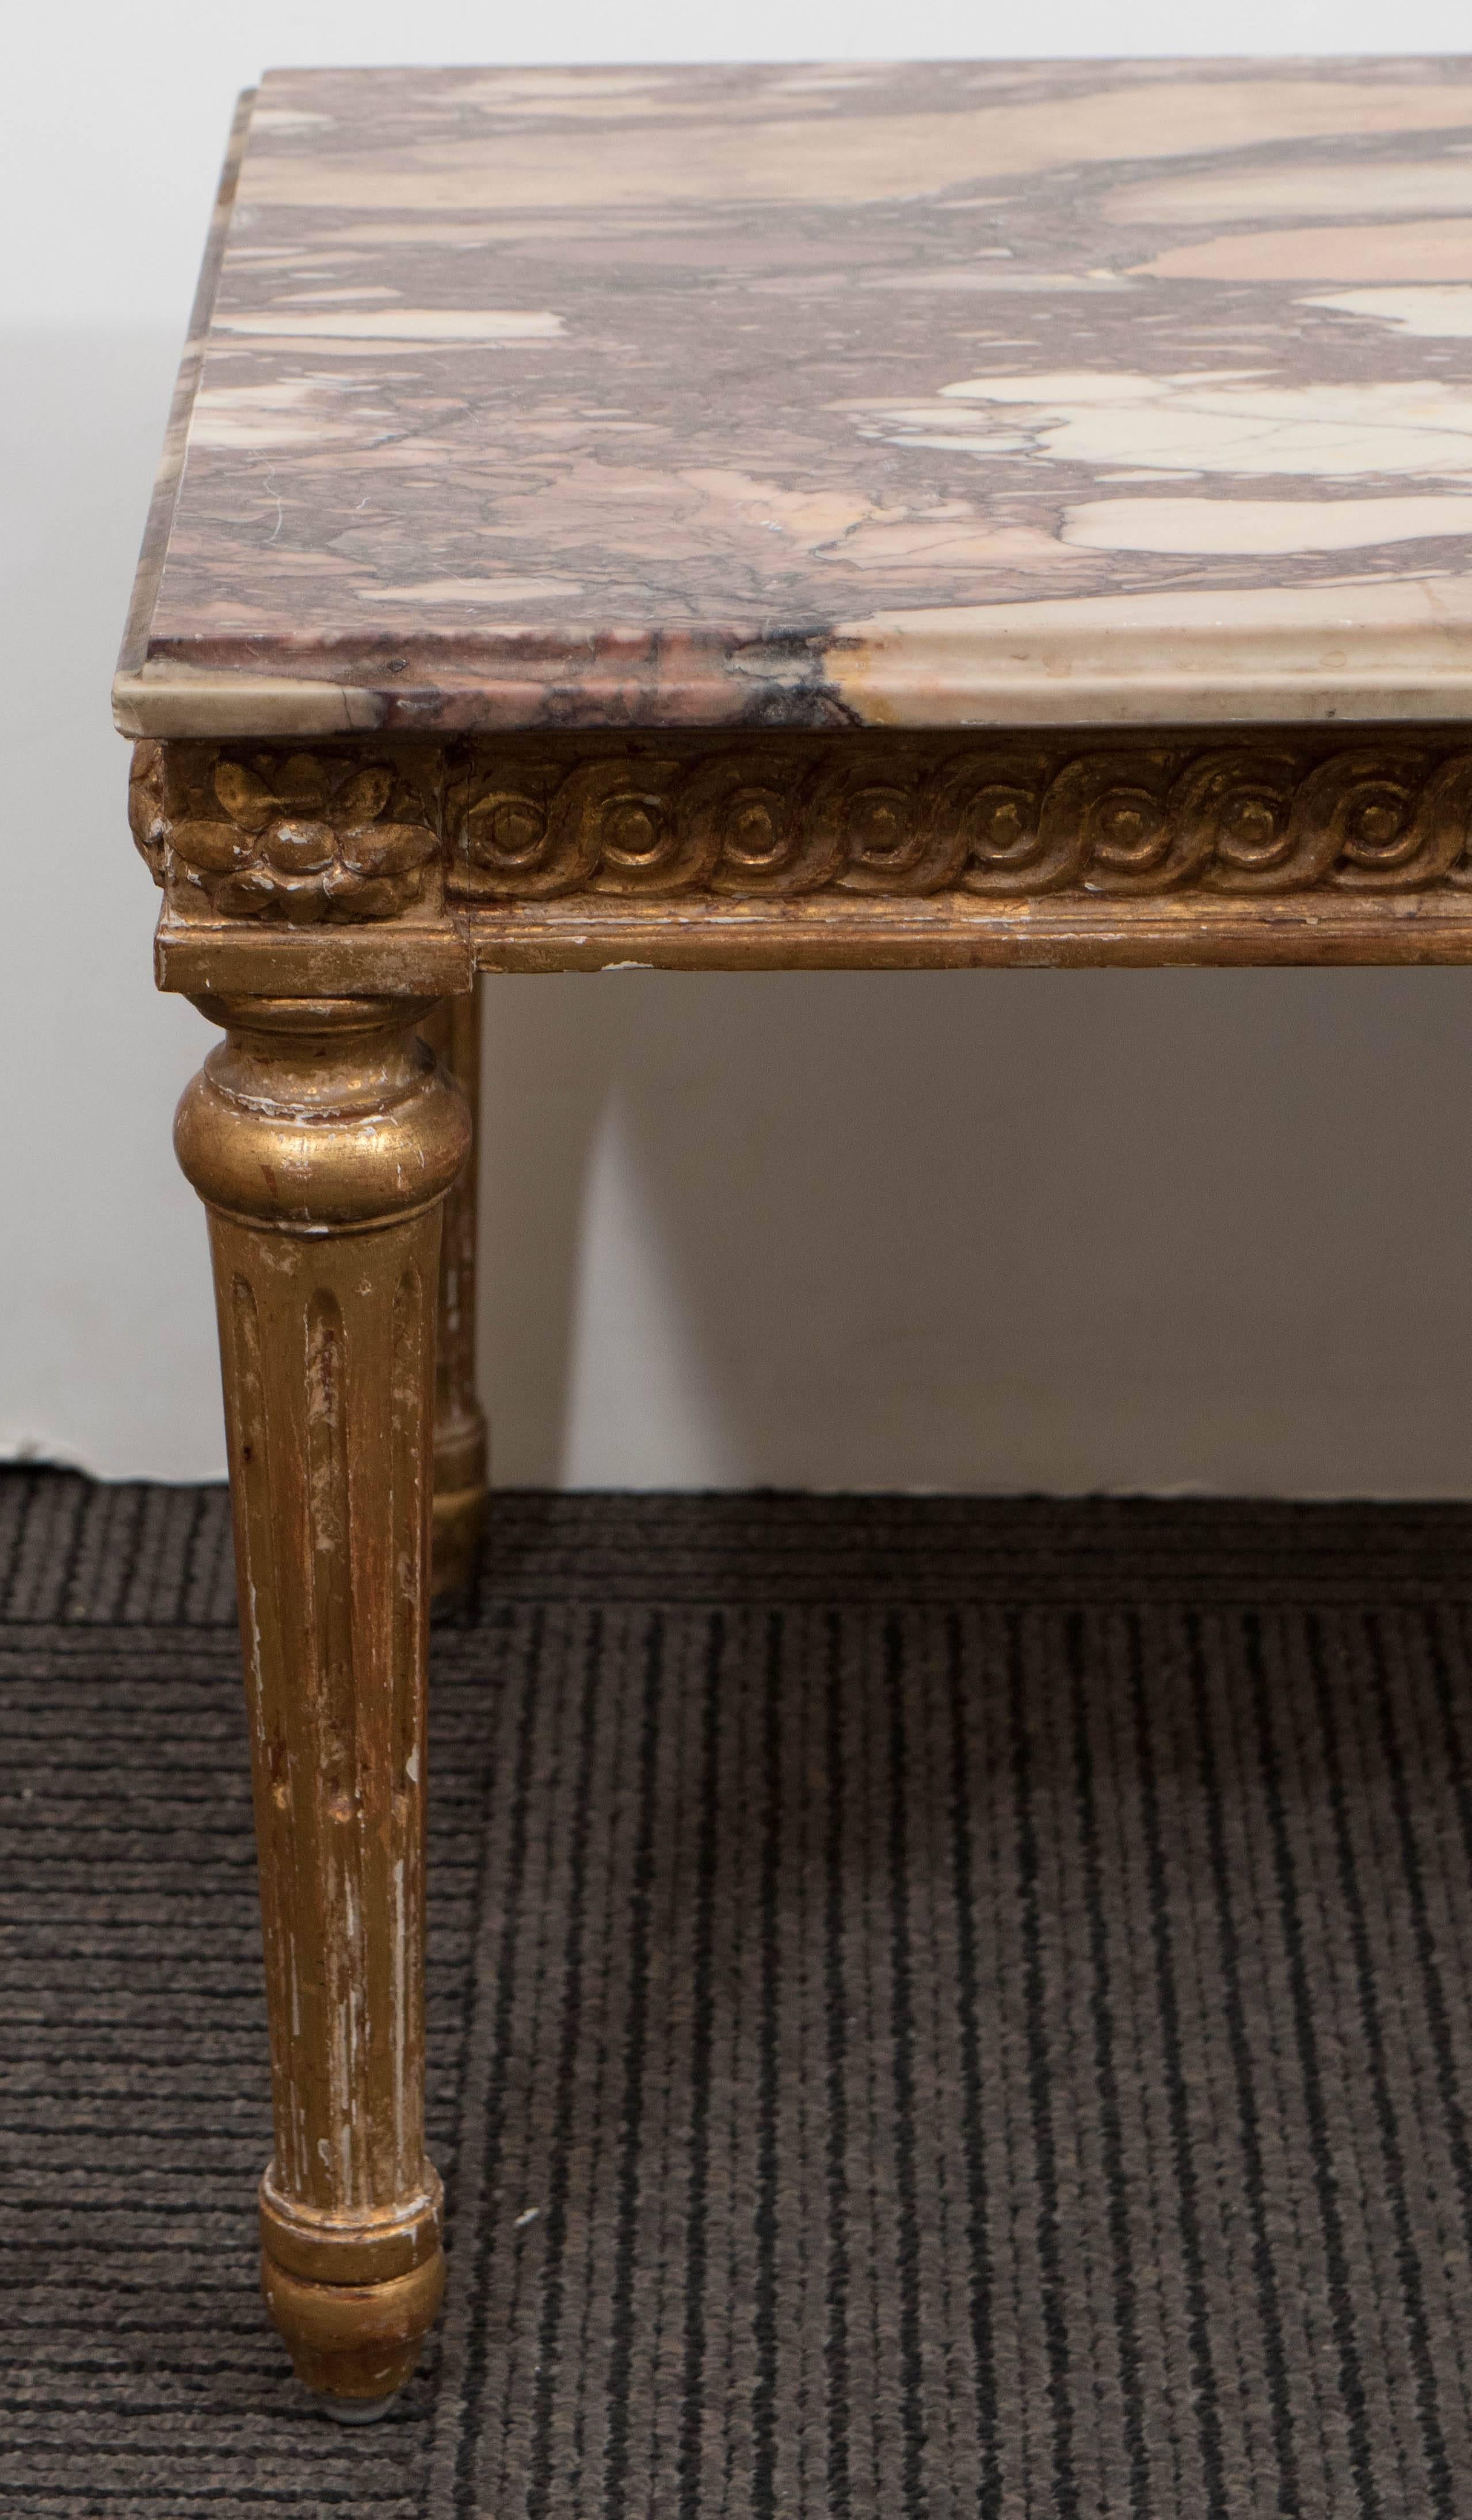 A pair of early 20th century side tables, in the neoclassical Louis XVI style, each with polished Breche d'Alep marble tops over carved giltwood base, with guilloche pattern frieze and rosette corners, on fluted tapered legs. Despite presence of age